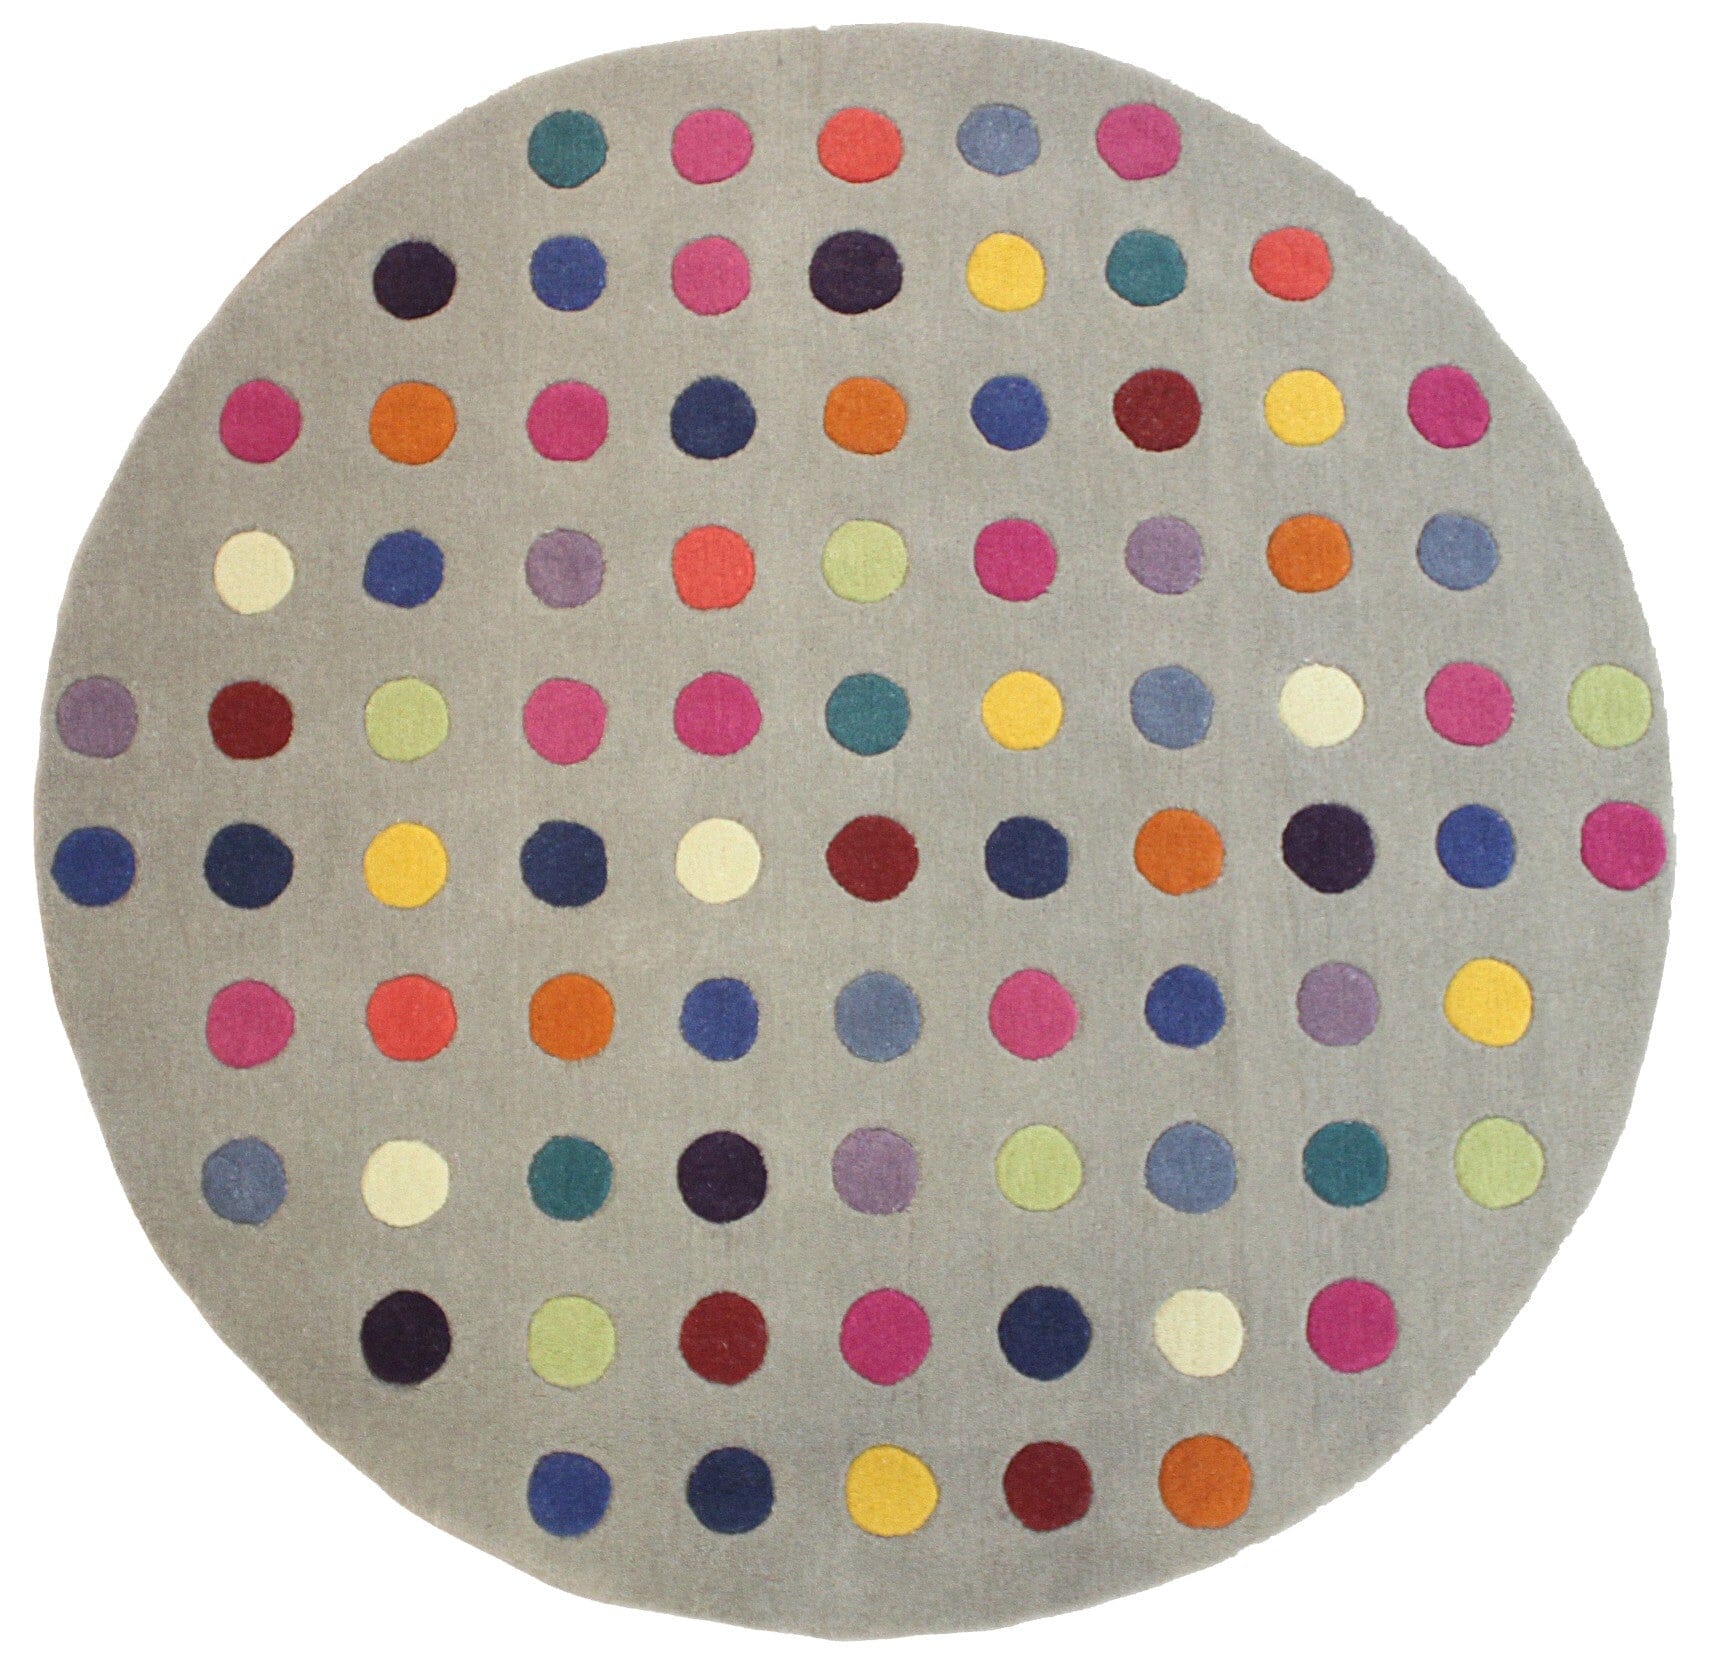 Asiatic Carpets Funk Hand Tufted Runner Spotty - 70 x 200cm